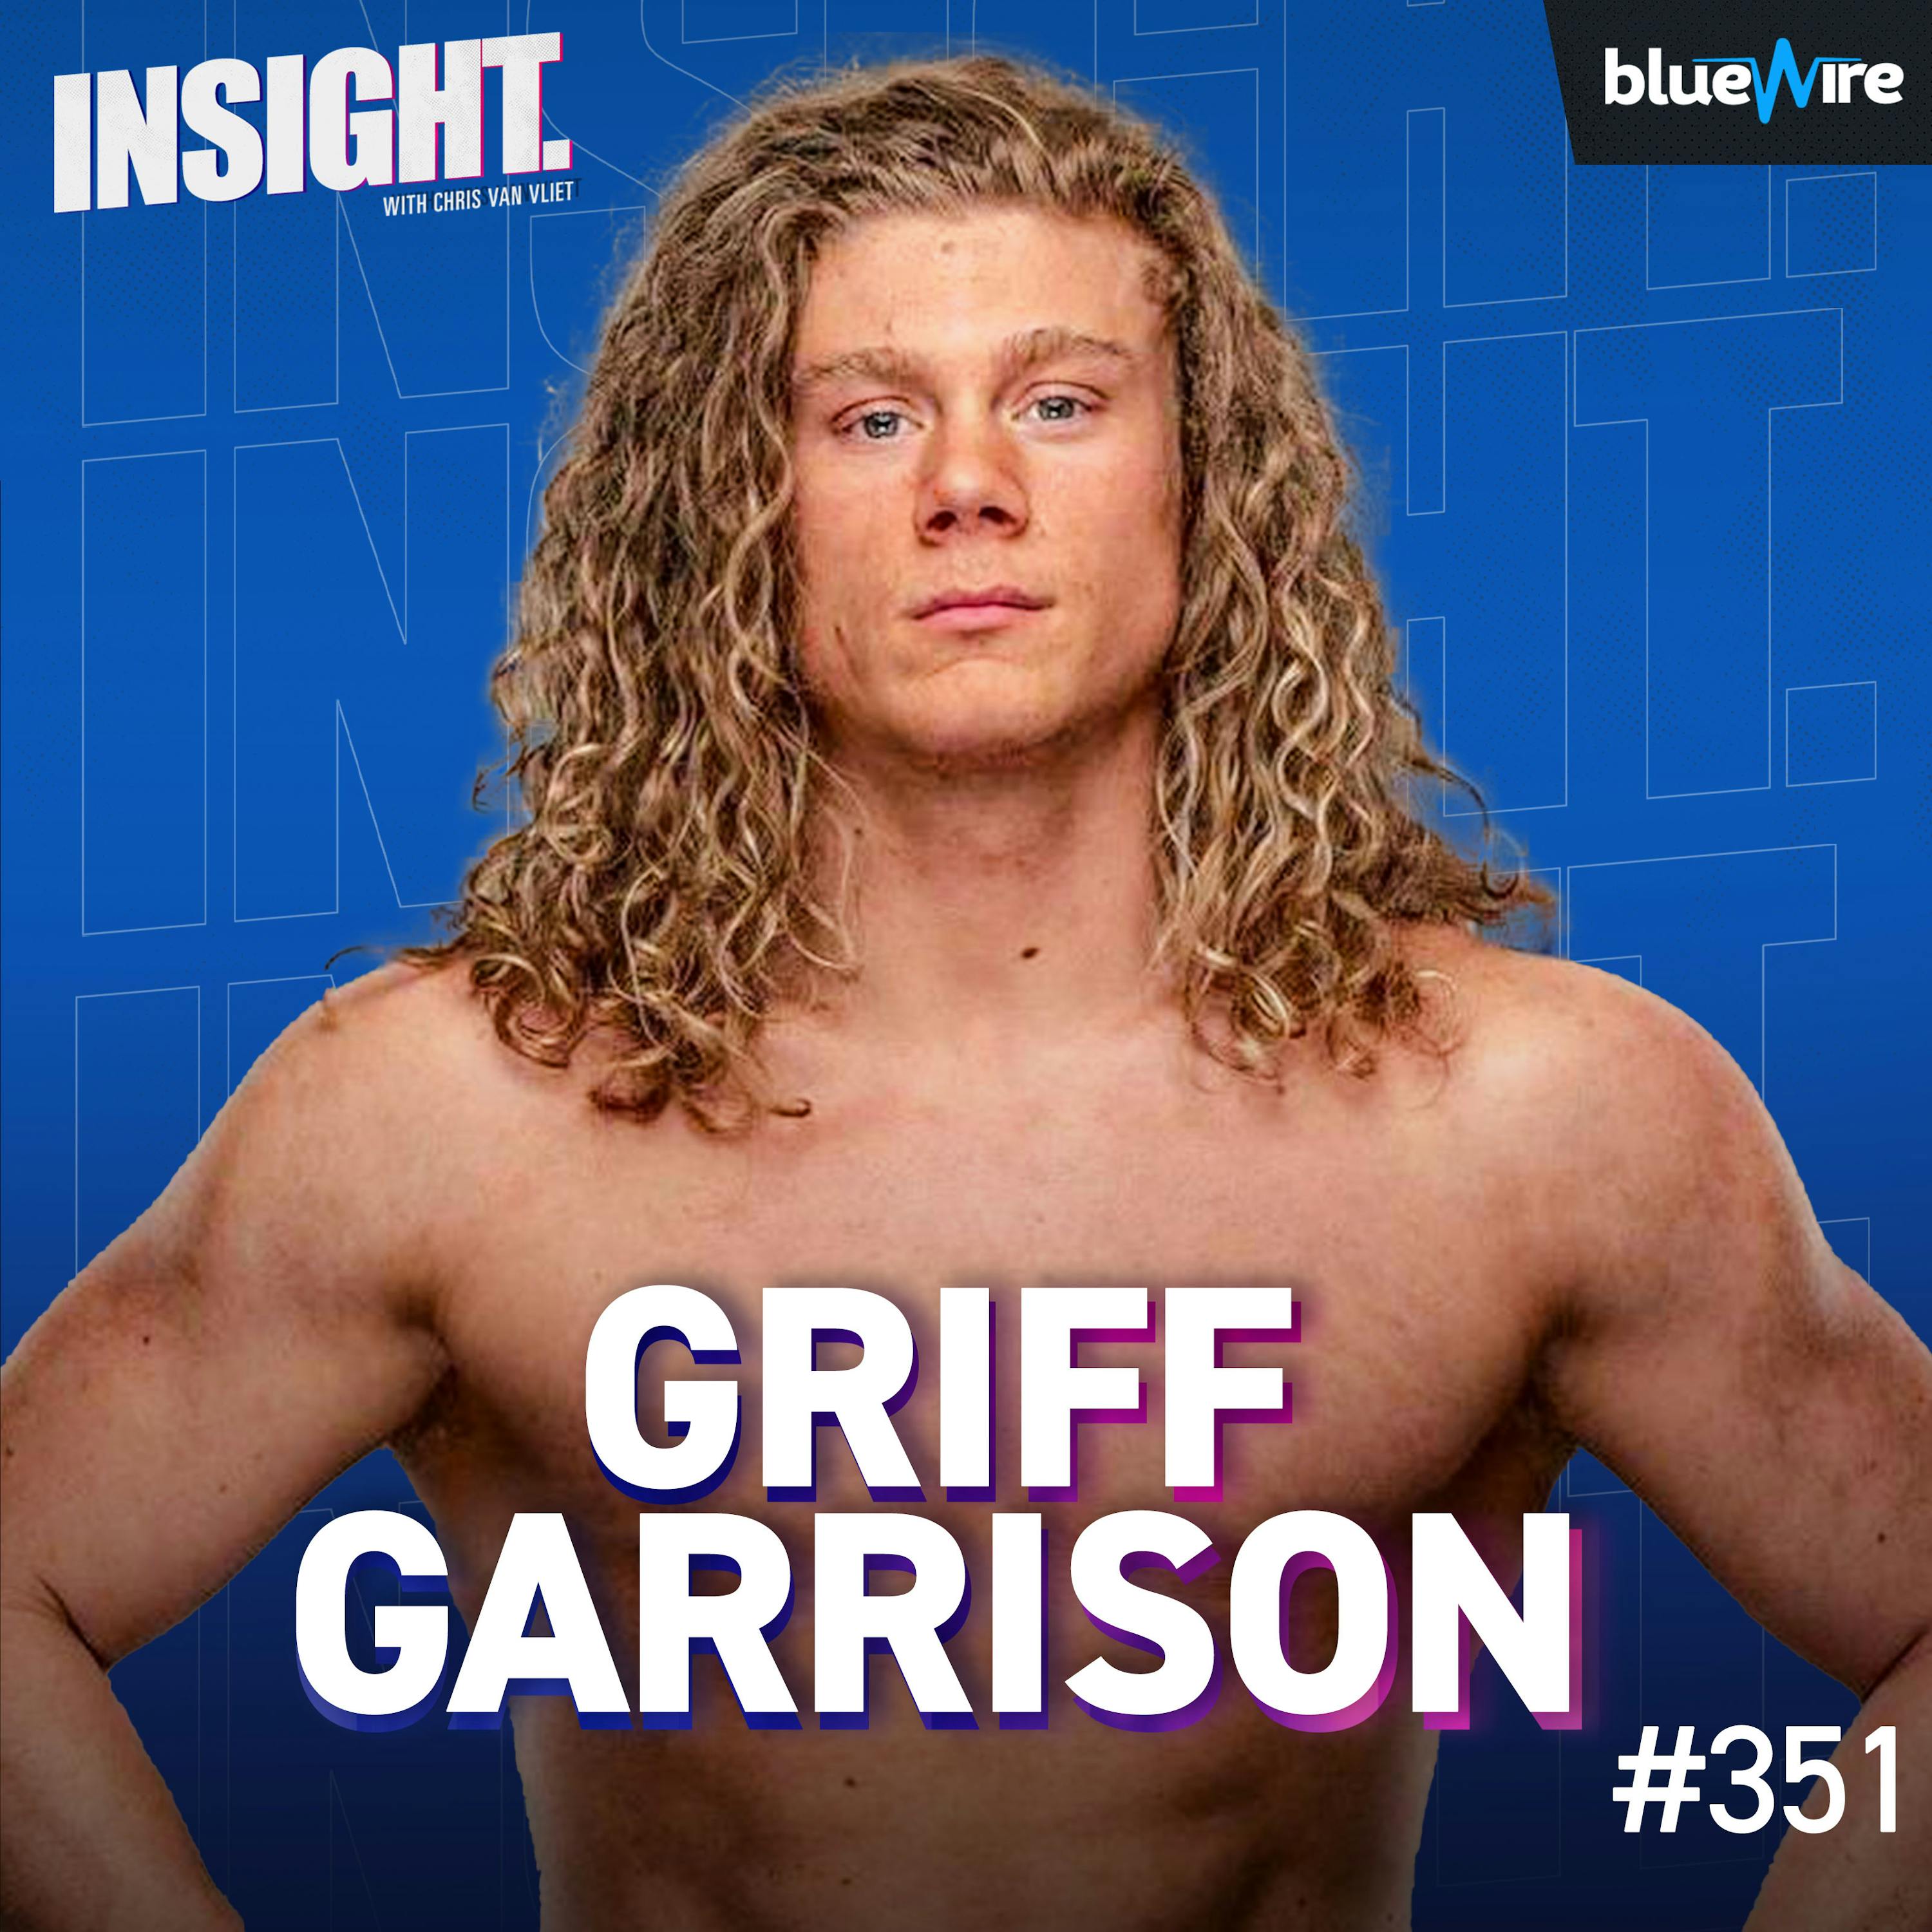 Griff Garrison On AEW, Varsity Blonds, Brian Pillman Jr. And Looking Like A Young Chris Jericho